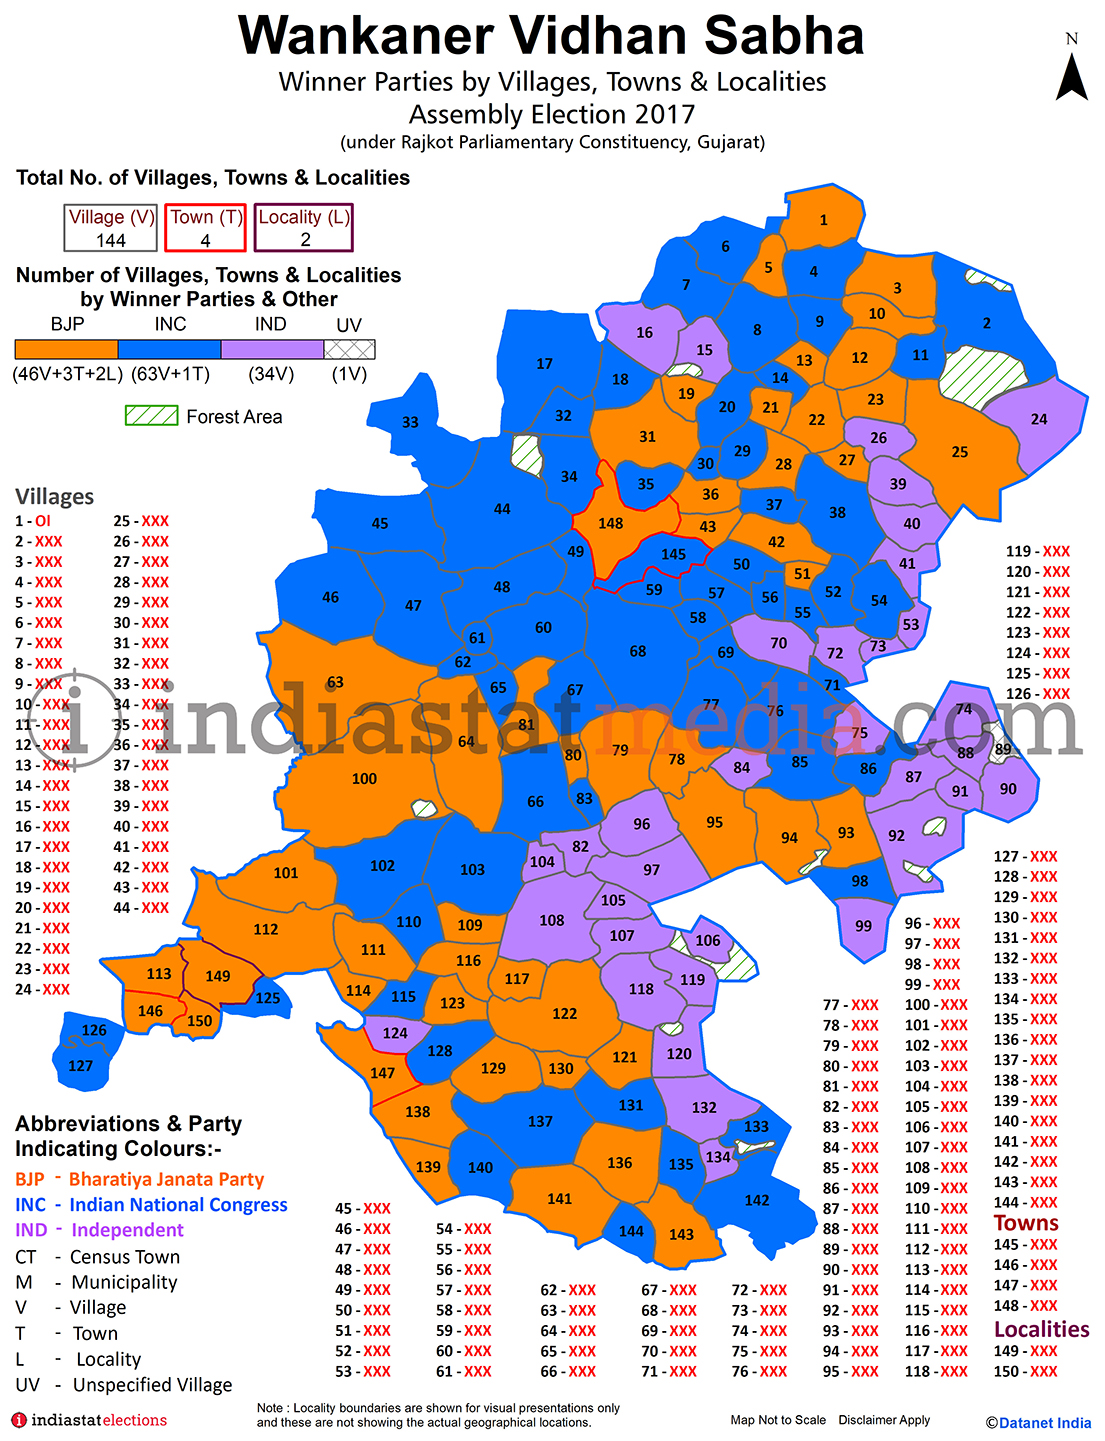 Winner Parties by Villages, Towns & Localities in Wankaner Assembly Constituency under Rajkot Parliamentary Constituency in Gujarat (Assembly Election - 2017)